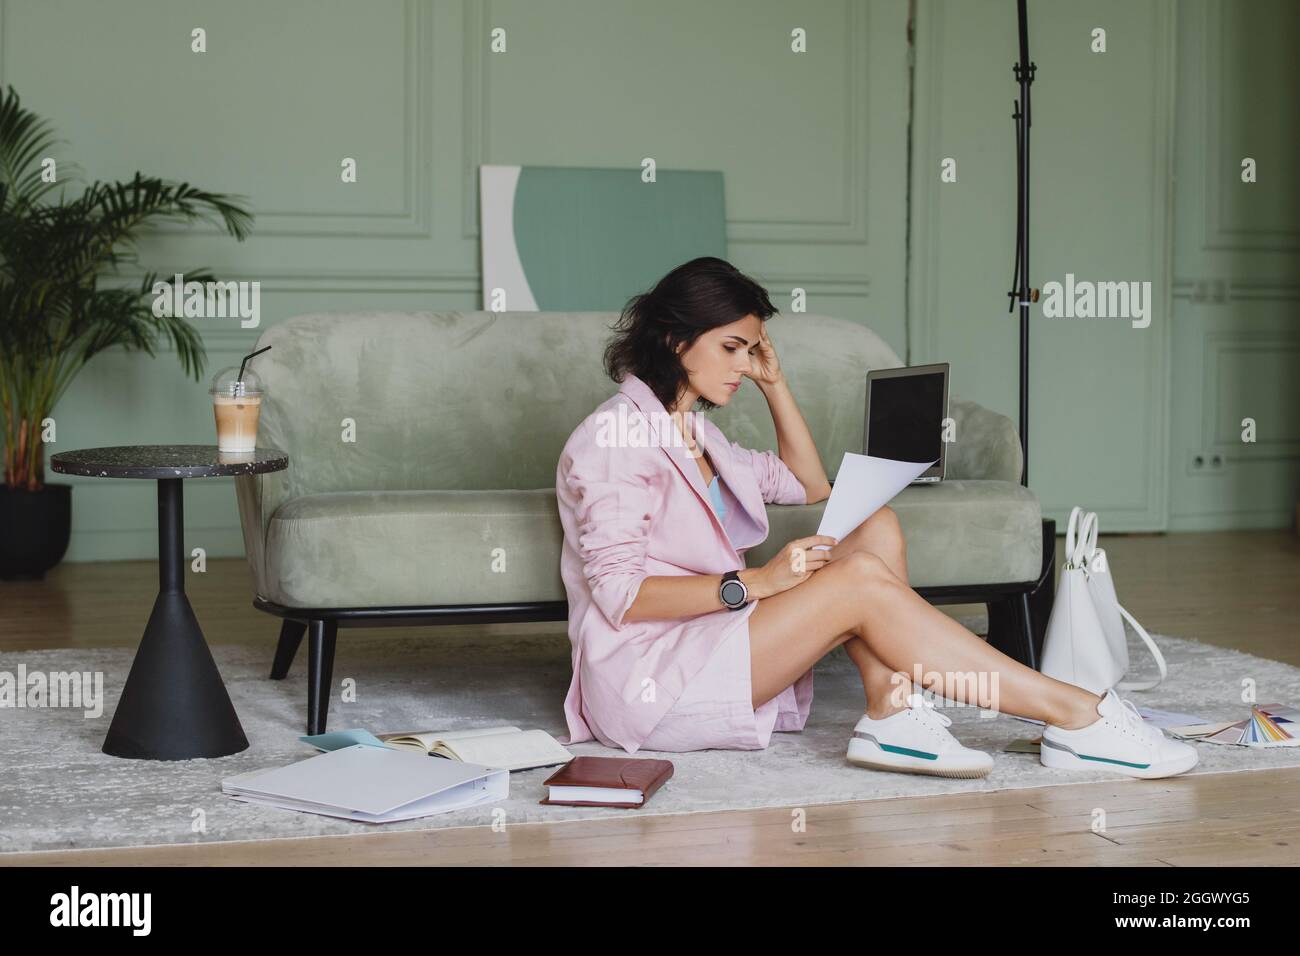 Business woman working at home with documents and laptop sitting on the floor. Stock Photo